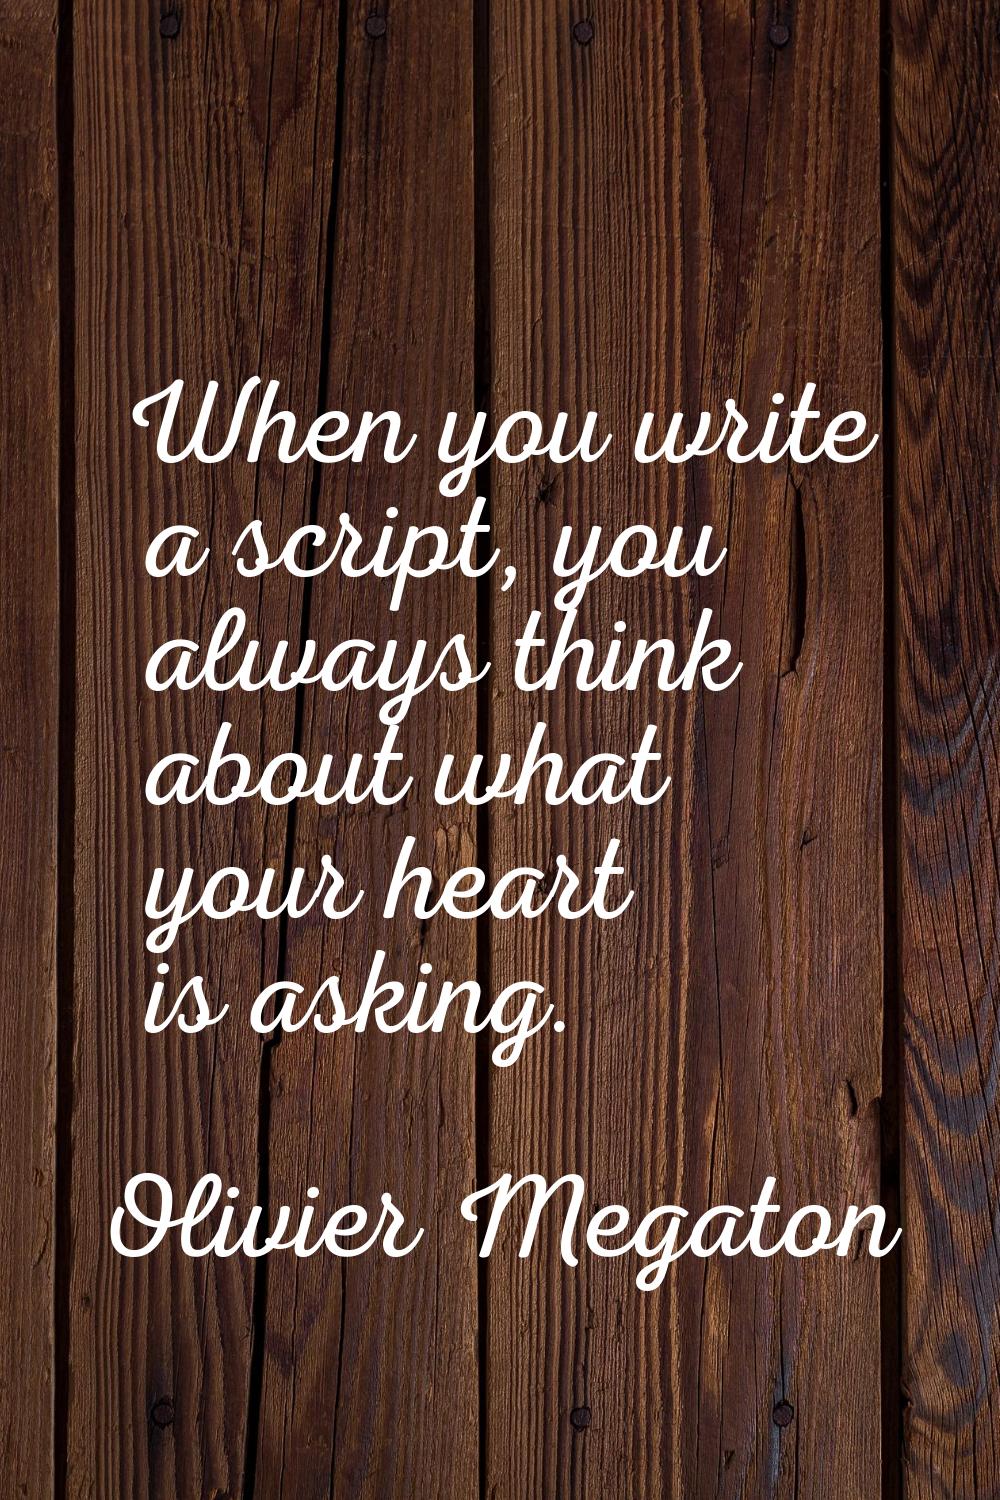 When you write a script, you always think about what your heart is asking.